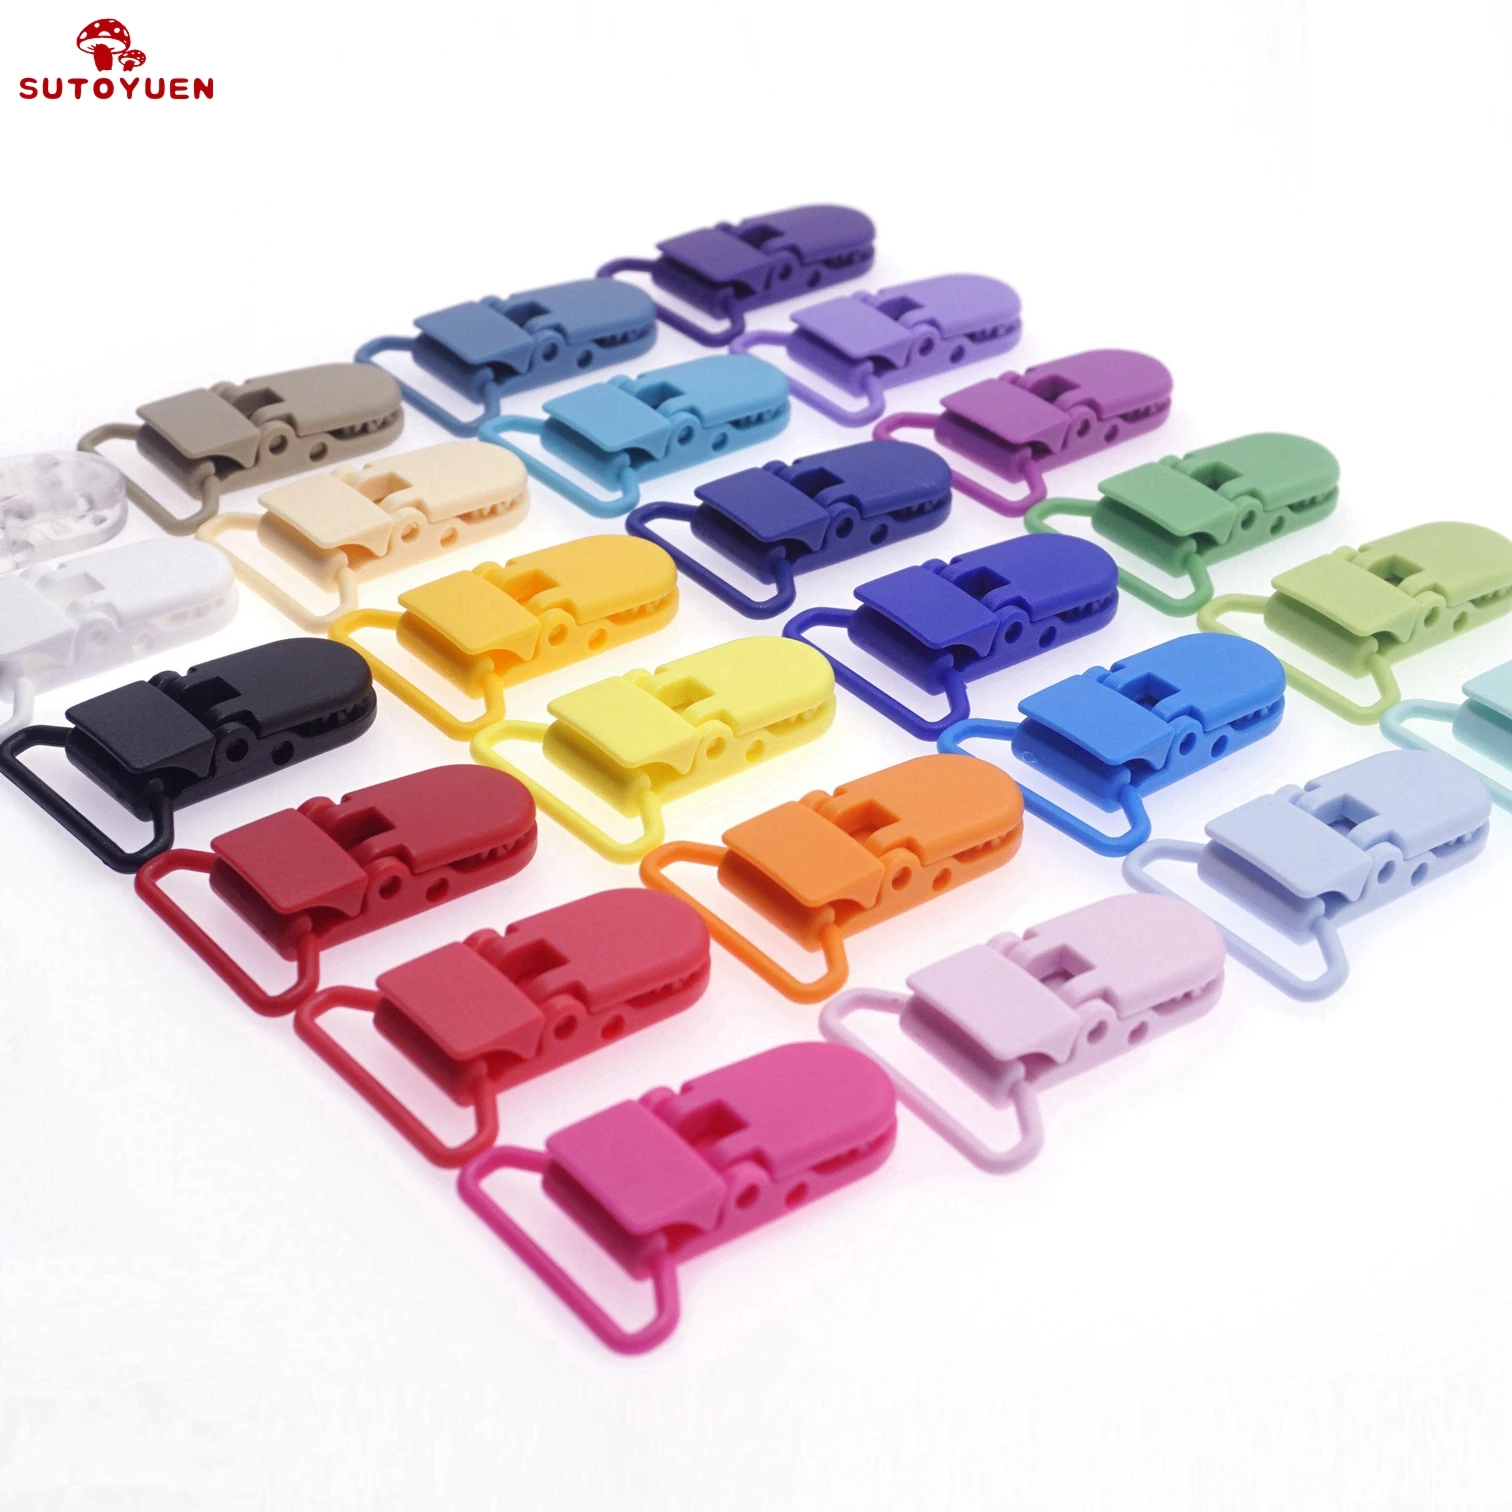 800pcs Sutoyuen 25MM Hot D Shape Kam Plastic Suspender Baby Pacifier Clips Dummy Soother Chain Holder for 25mm Ribbon